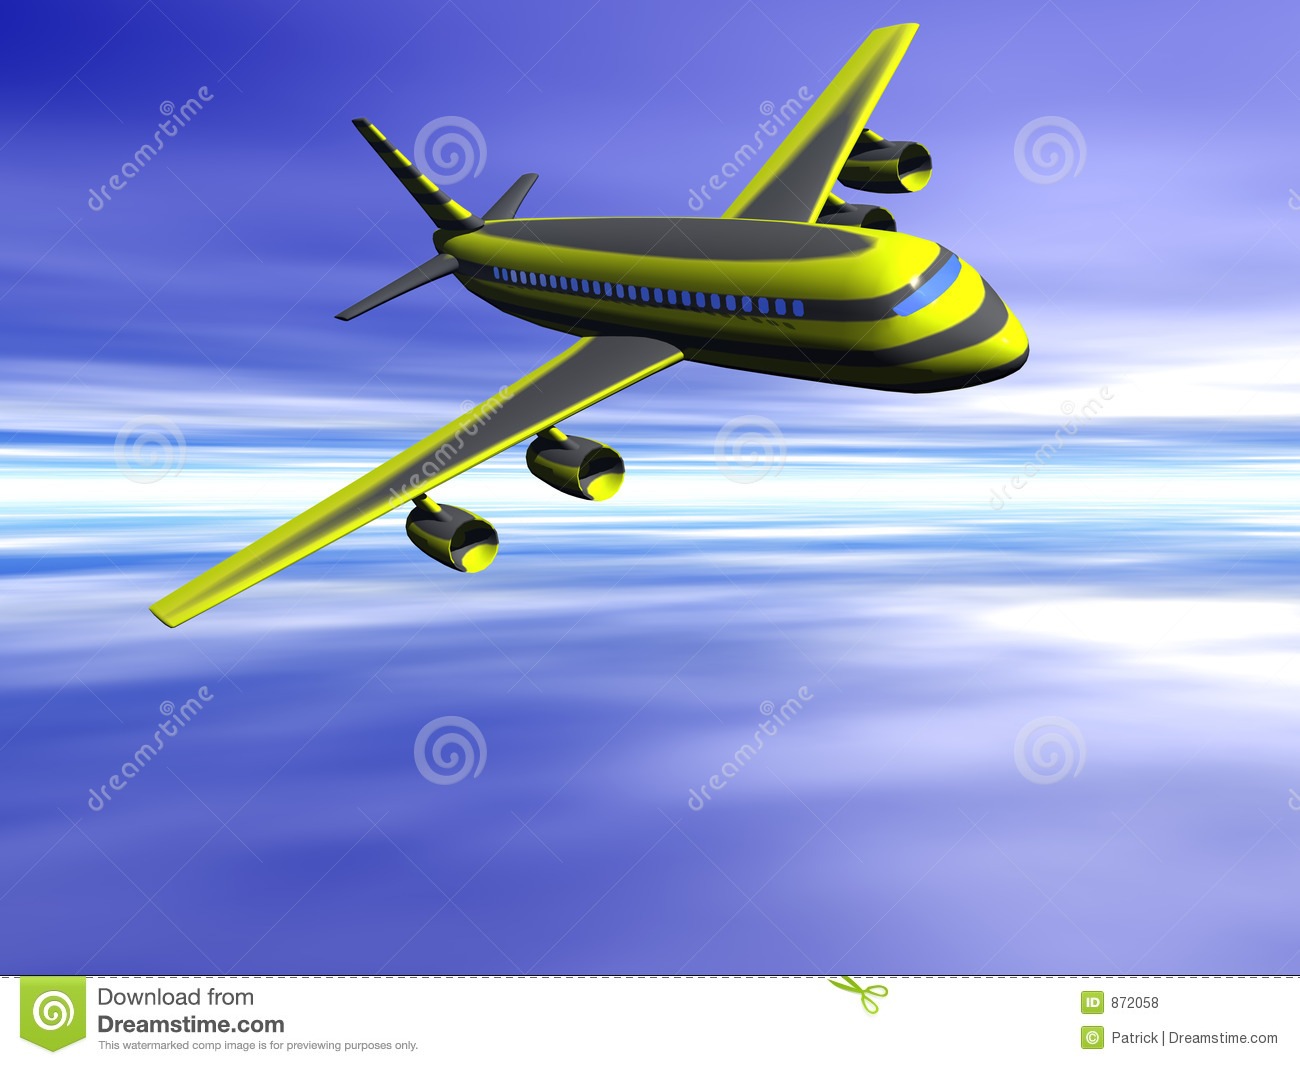 Airplane Going On Vacation  Royalty Free Stock Photos   Image  872058